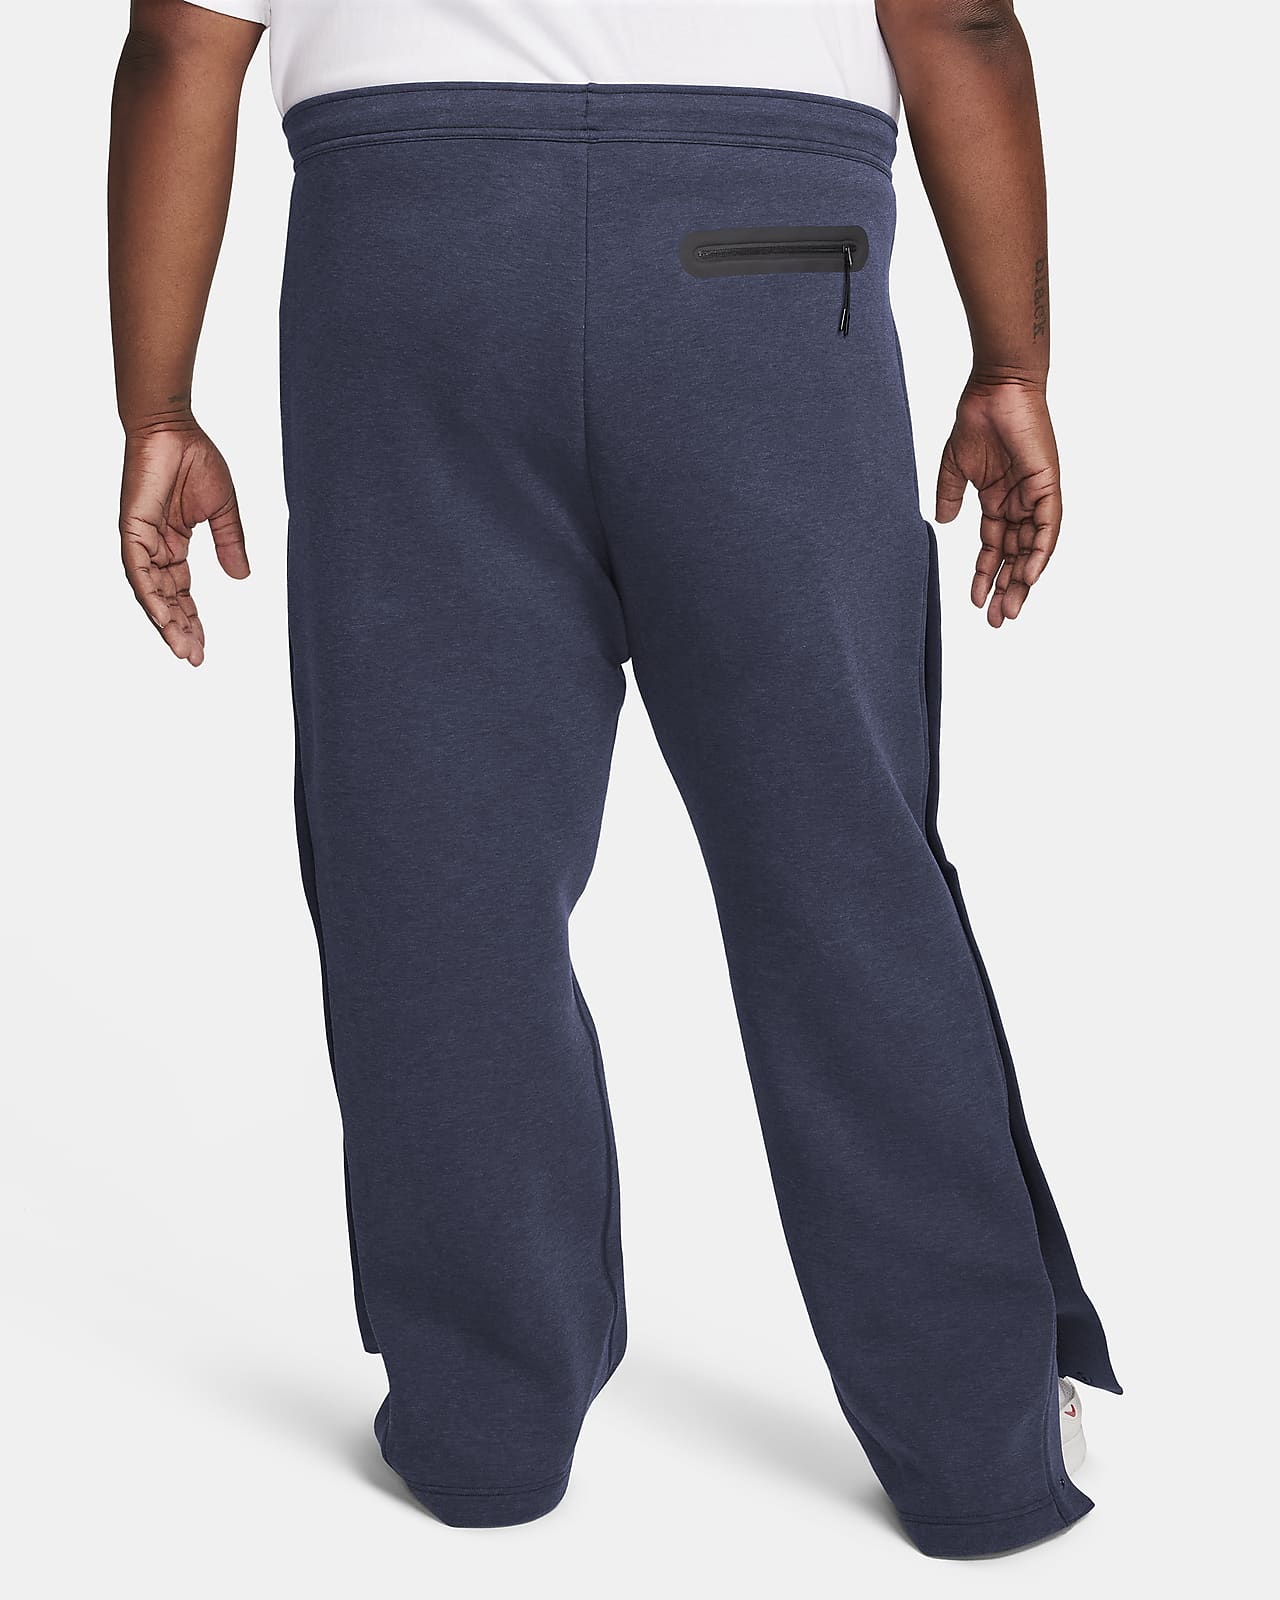 Athletic Works Men's Tennis Pants, Sizes up to 3XL